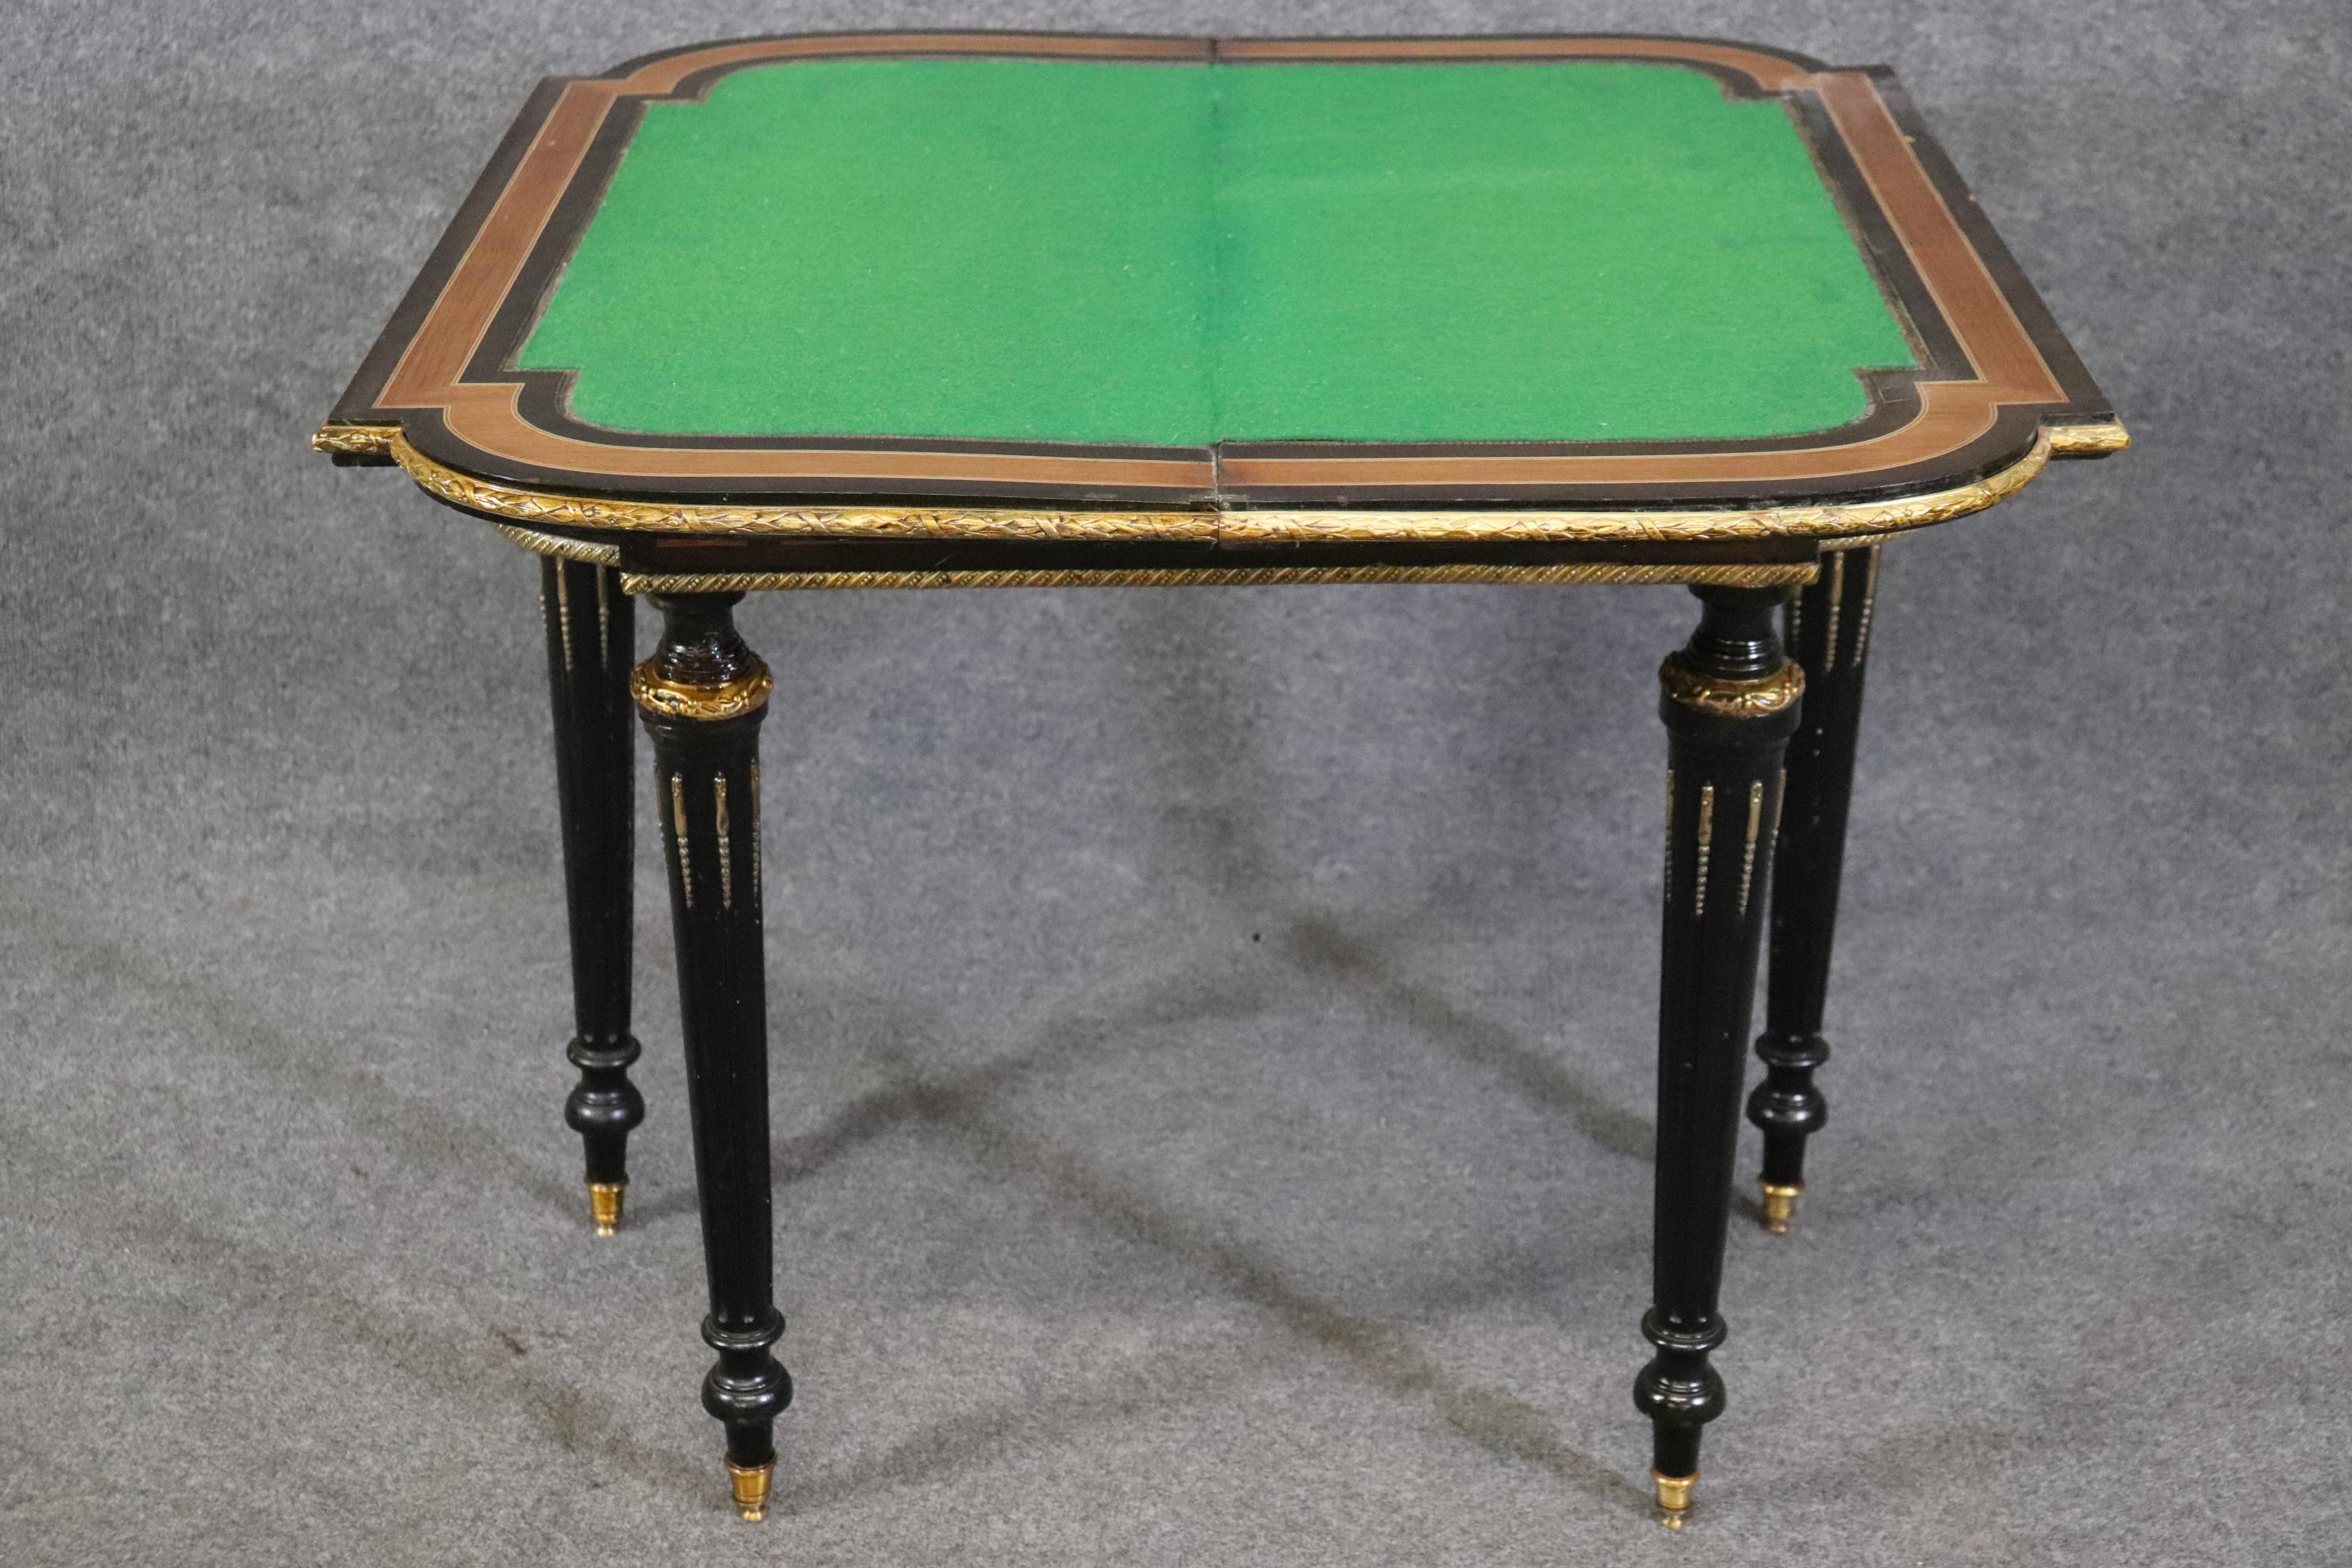 If you're going to be playing cards, playing chess or any other game with your friends or family-it might as well be in style! This is a beautifully inlaid French games table featuring inlay of birds and foliage in walnut and a gorgeous ebonized